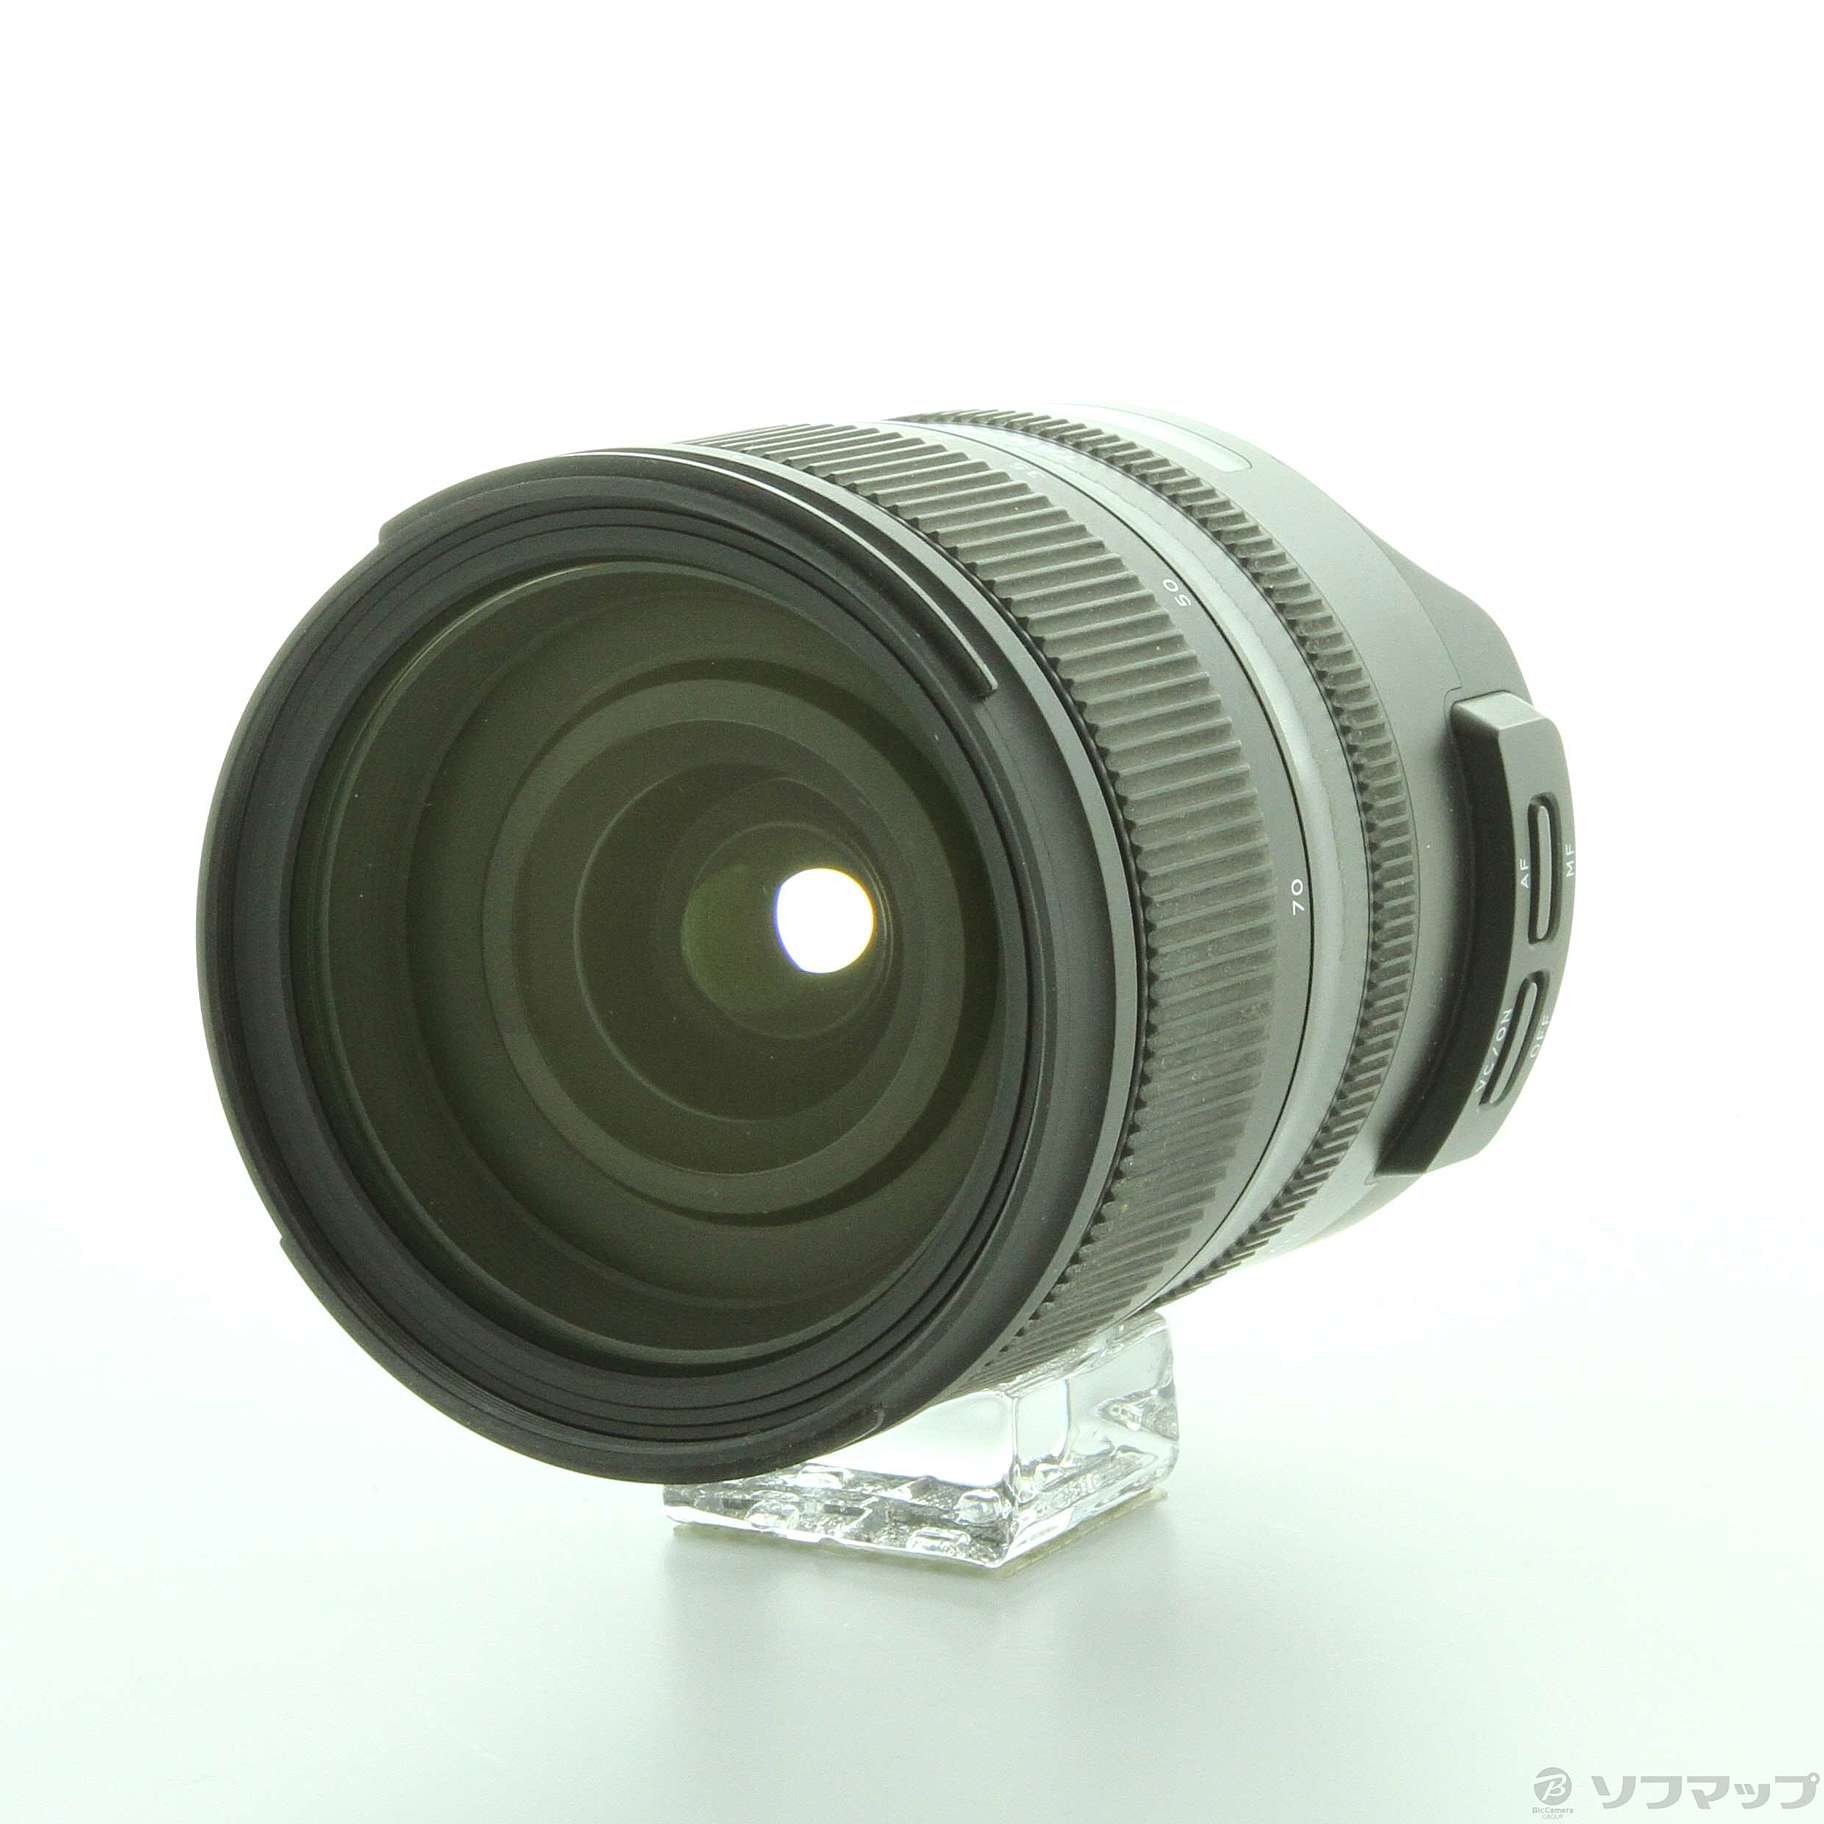 Tamron SP24-70mm F2.8 Di VC USD G2 ニコン用 - レンズ(ズーム)